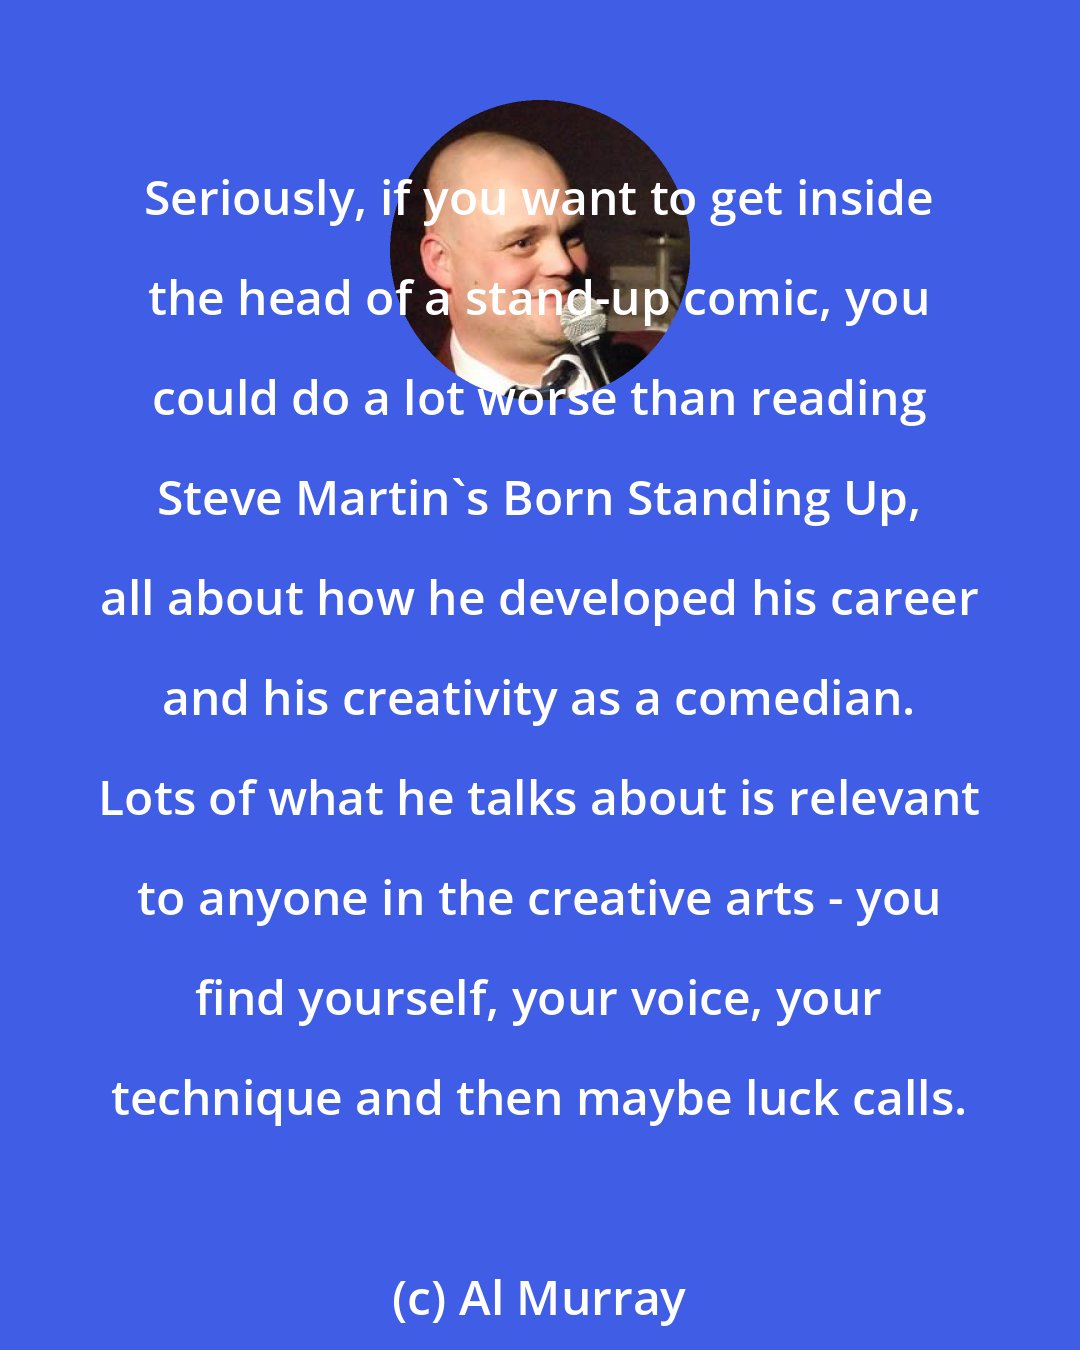 Al Murray: Seriously, if you want to get inside the head of a stand-up comic, you could do a lot worse than reading Steve Martin's Born Standing Up, all about how he developed his career and his creativity as a comedian. Lots of what he talks about is relevant to anyone in the creative arts - you find yourself, your voice, your technique and then maybe luck calls.